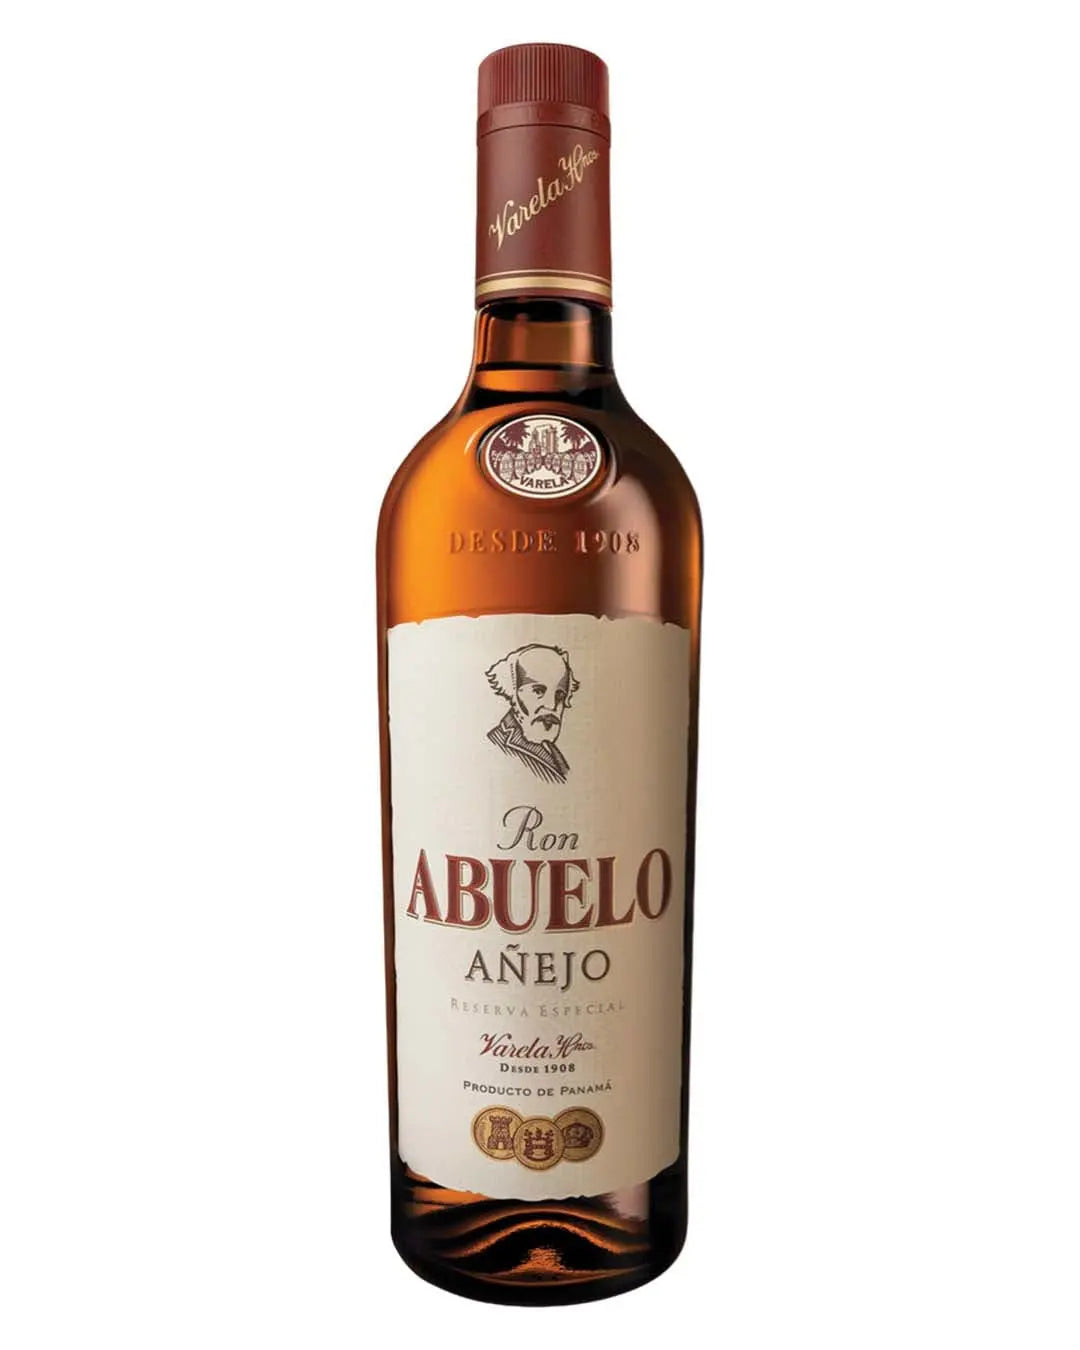 Ron Abuelo Anejo Reserva Especial 5 Year Old Rum, 70 cl Rum